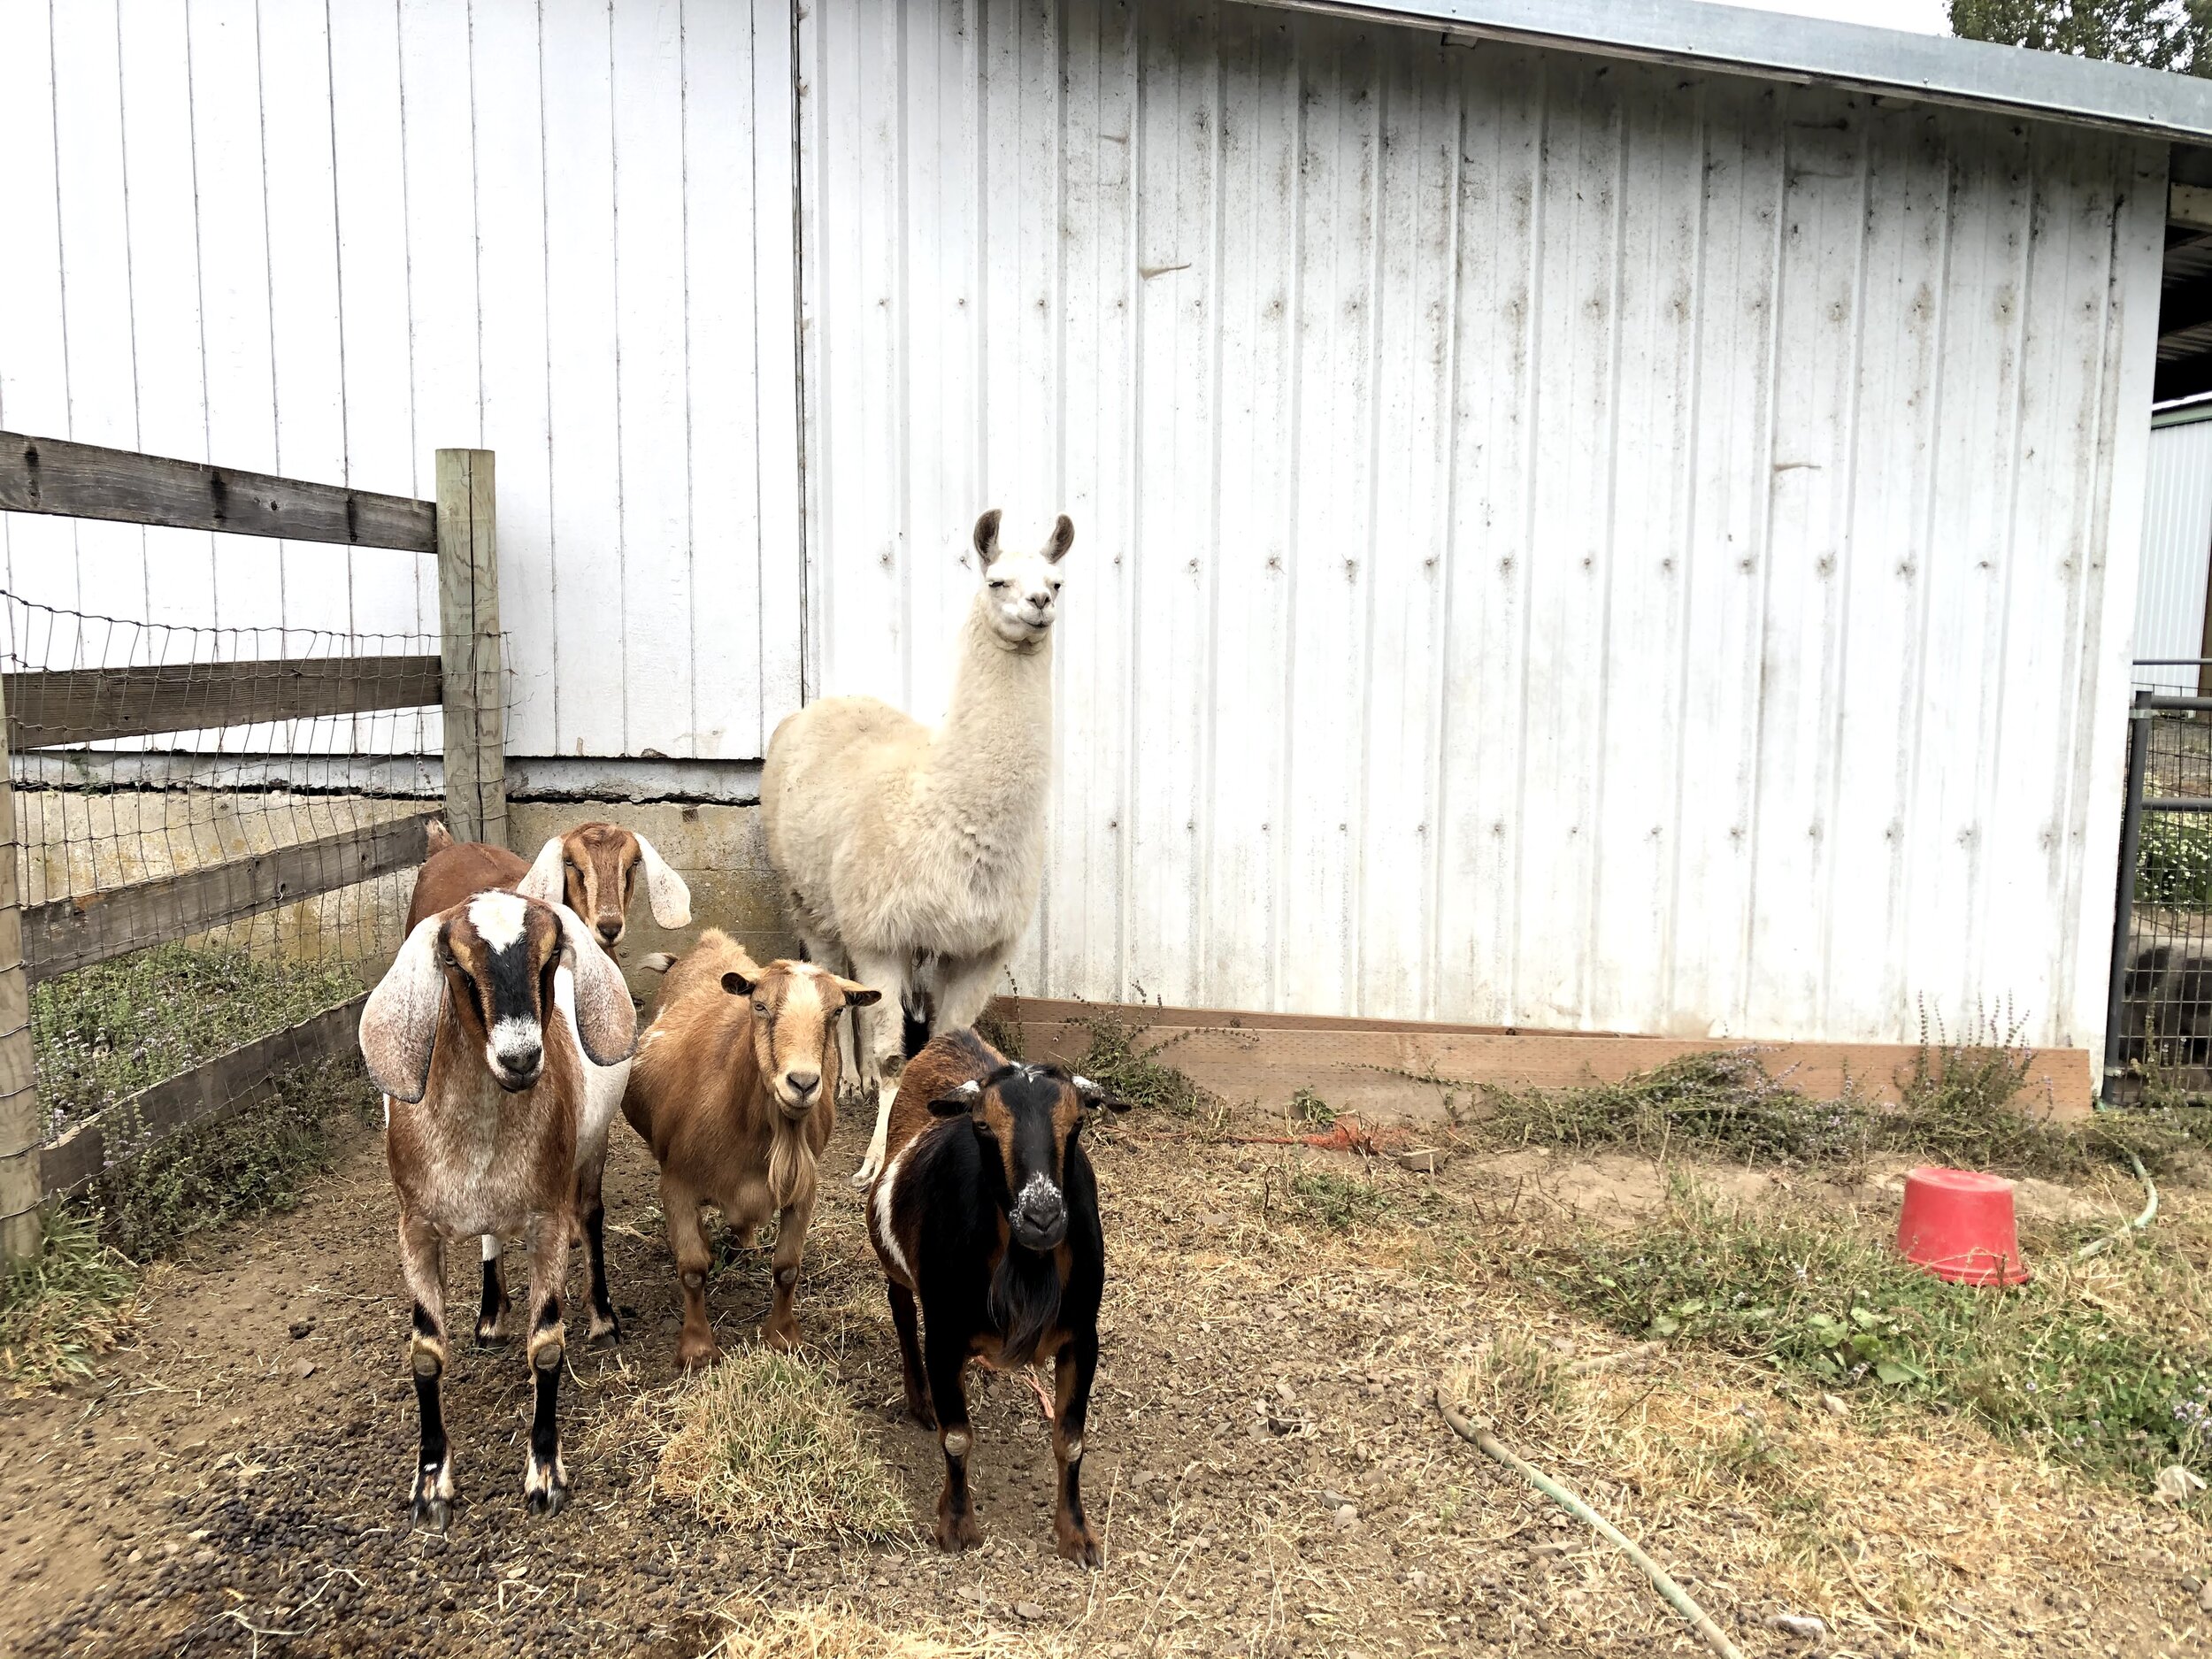 Cosmo and his goat friends